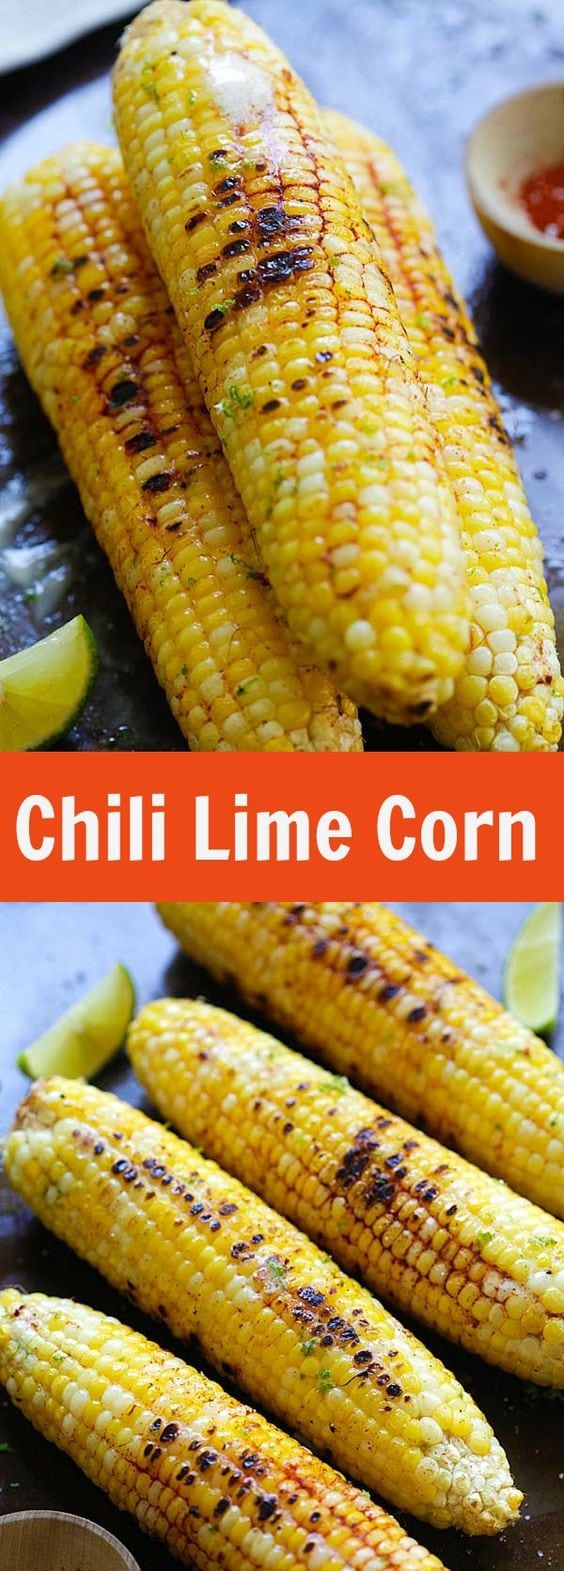 Chili Lime Corn - fresh corn seasoned with chili-lime spice mix. This chili lime corn recipe is so delicious and amazing that you'll want more | rasamalaysia.com